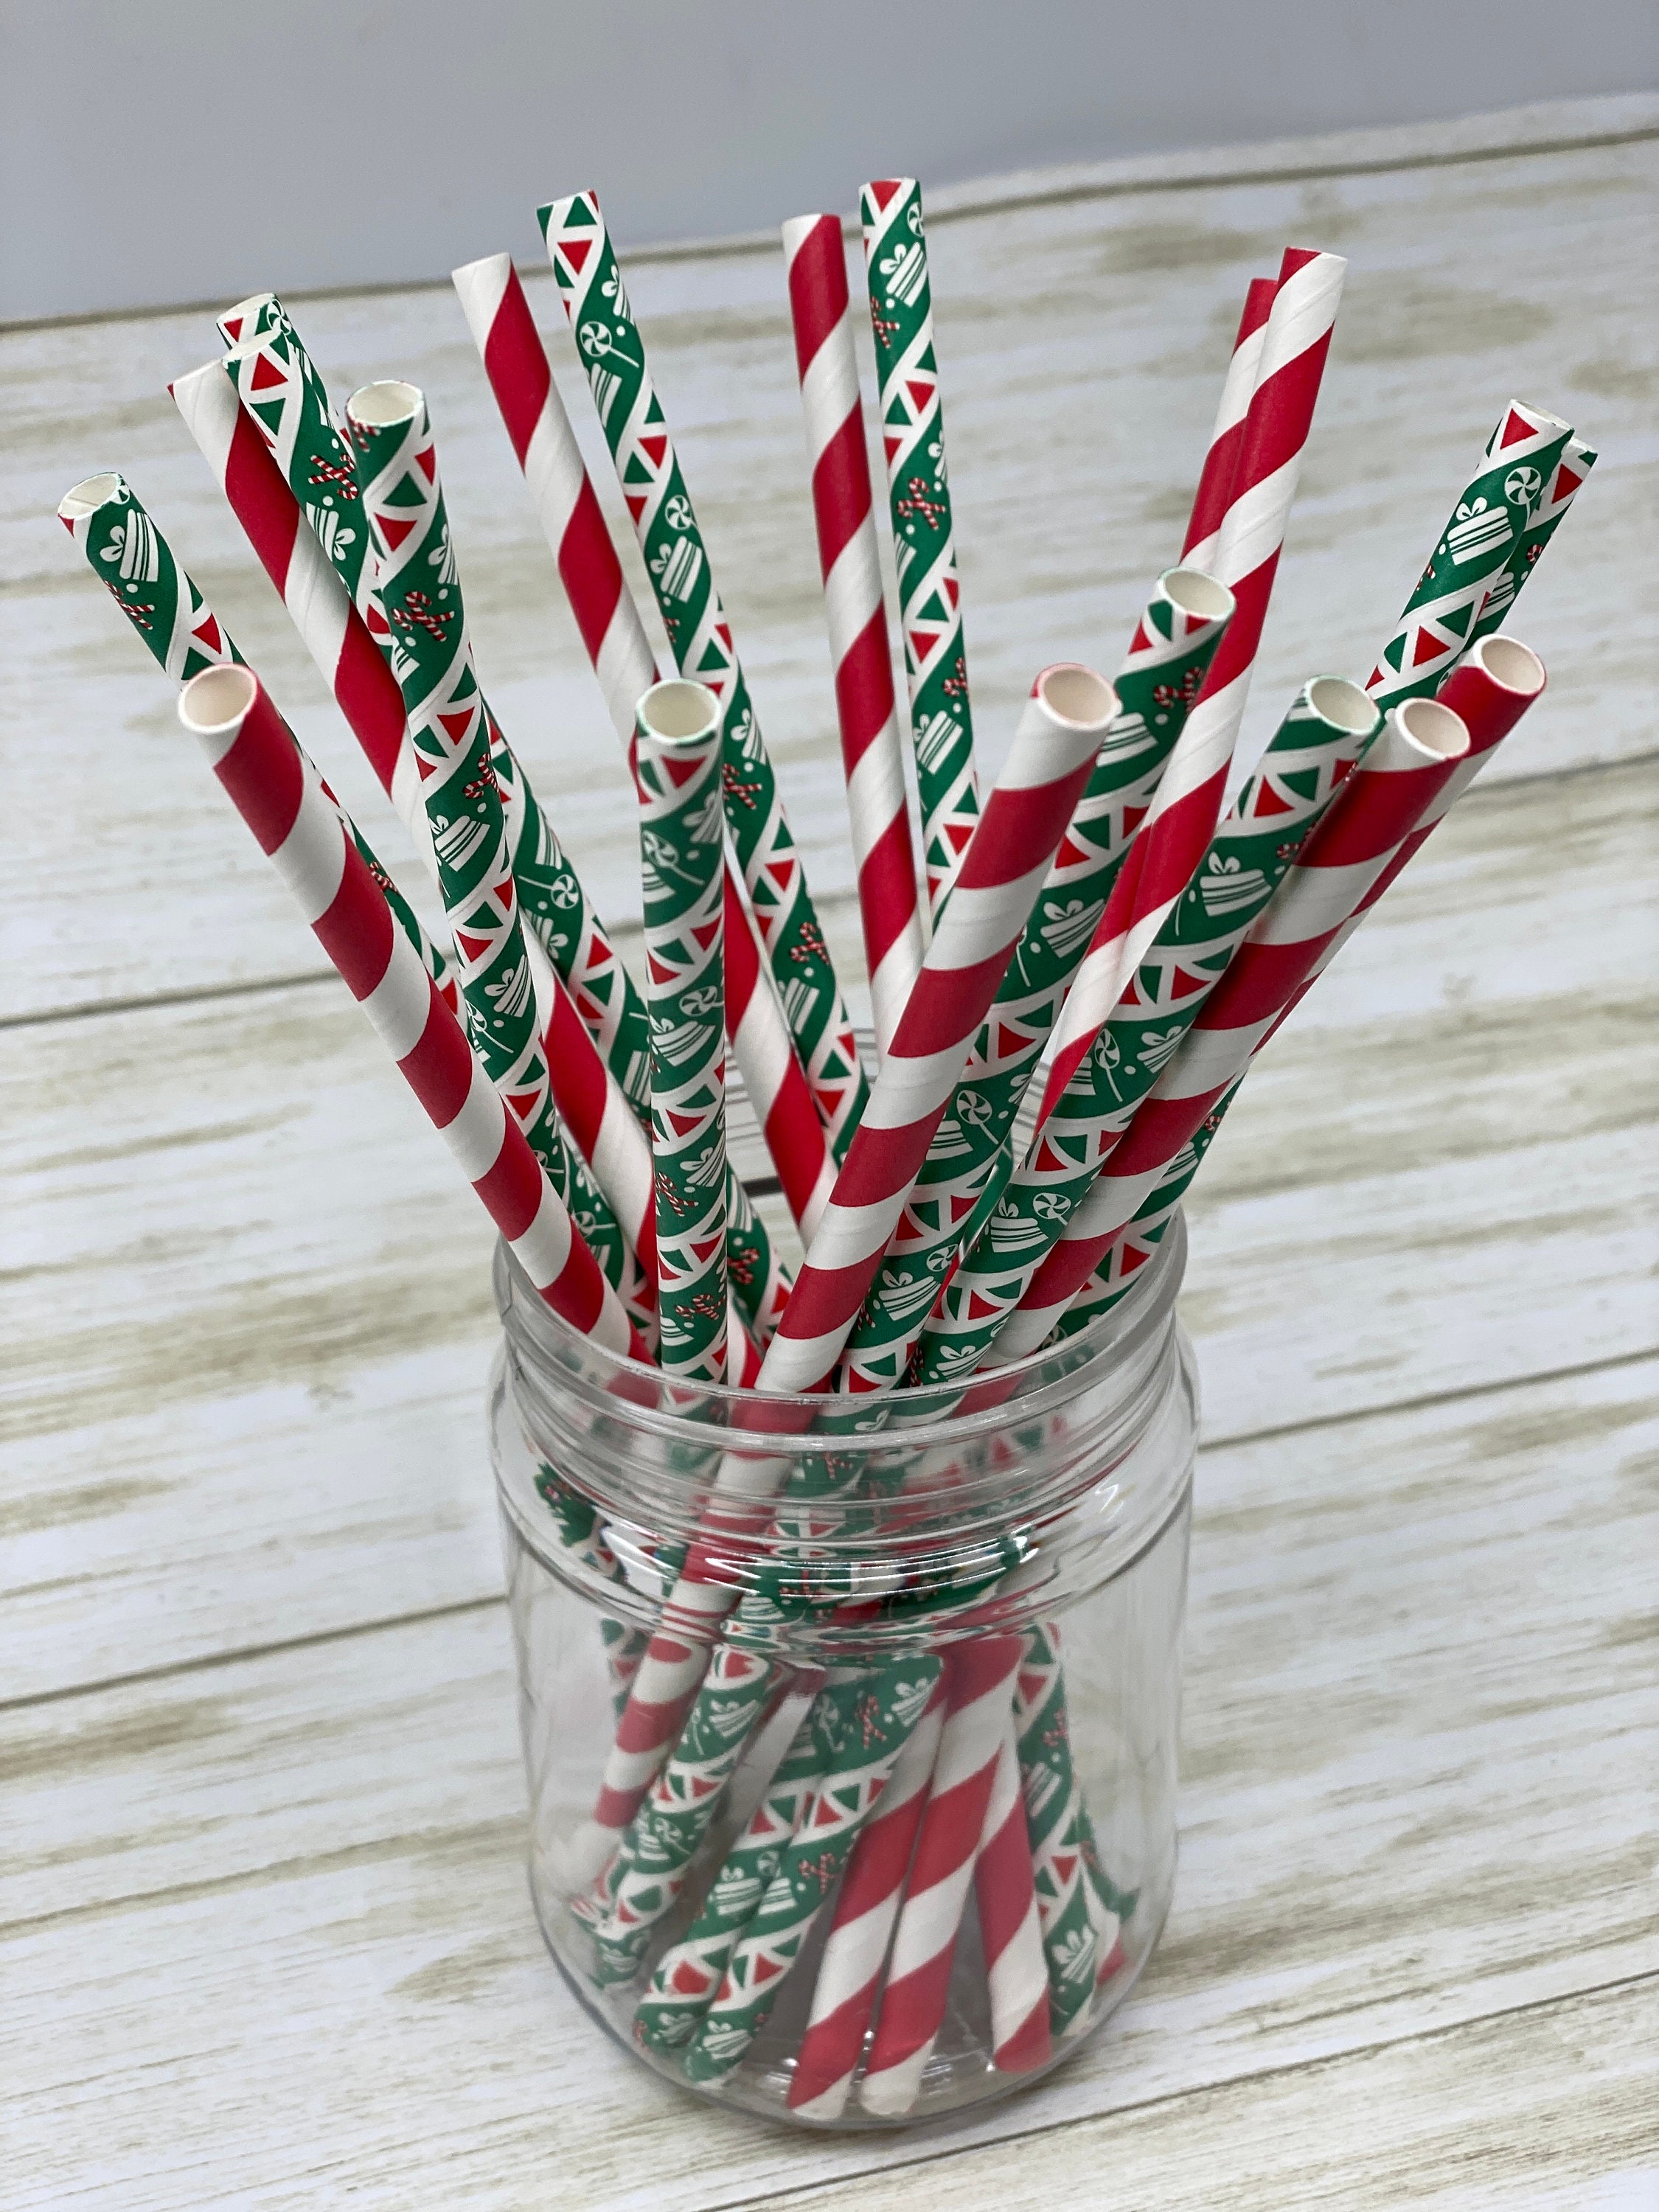 HAKSEN 125PCS Christmas Paper Straws, 10 Styles Red and Green Christmas  Drinking Straws Stripes Christmas Straws for Drinks Party Wedding Favors  DIY